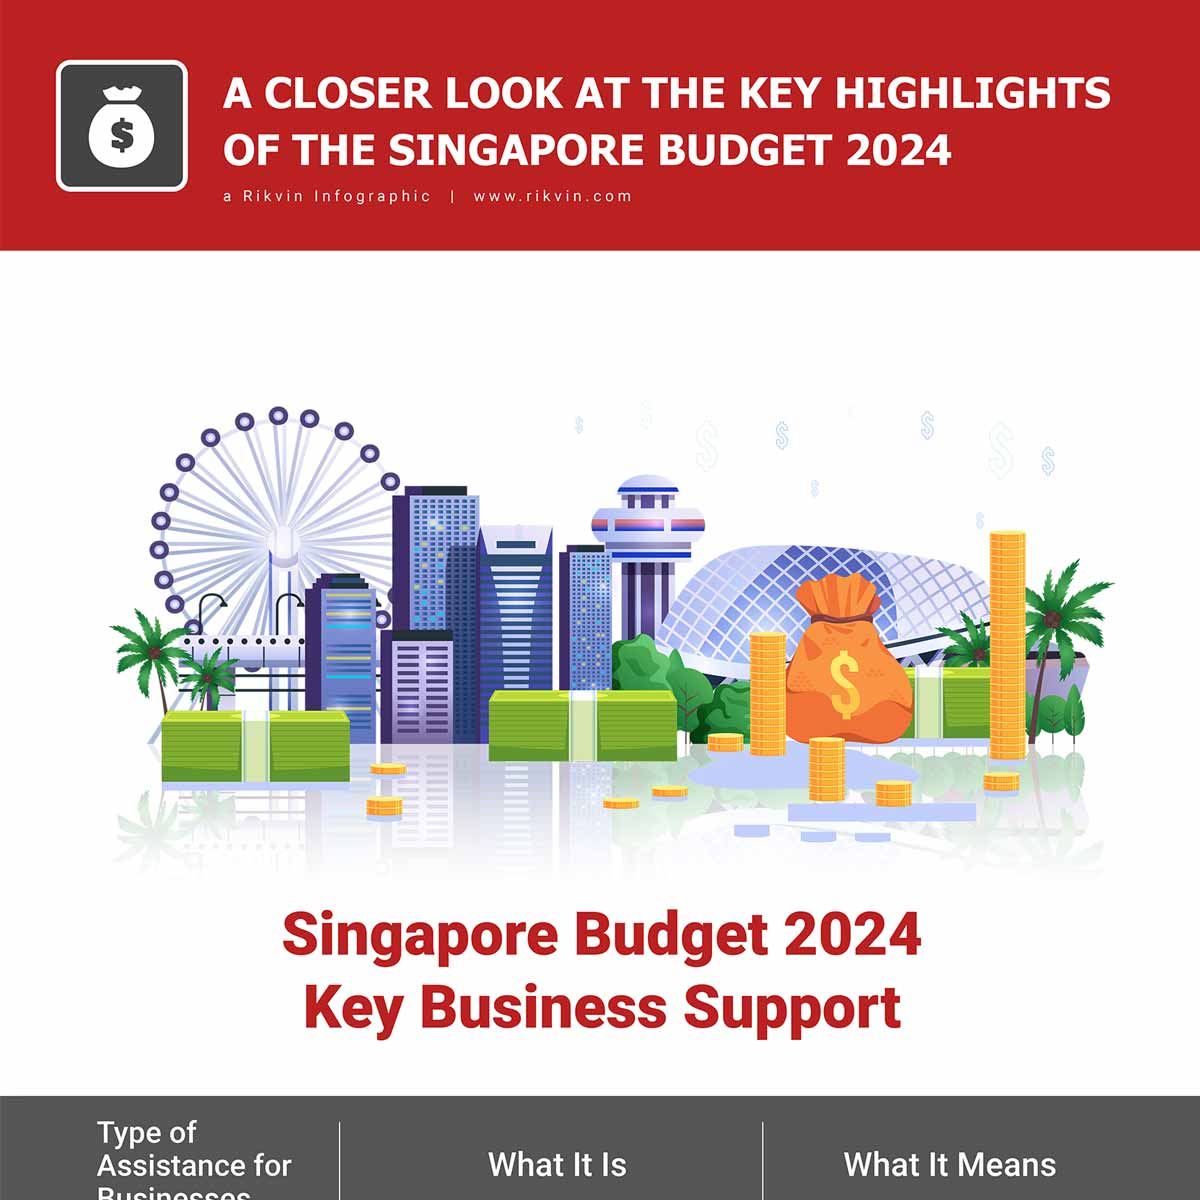 What Are the Important Highlights of the Singapore Budget 2024?